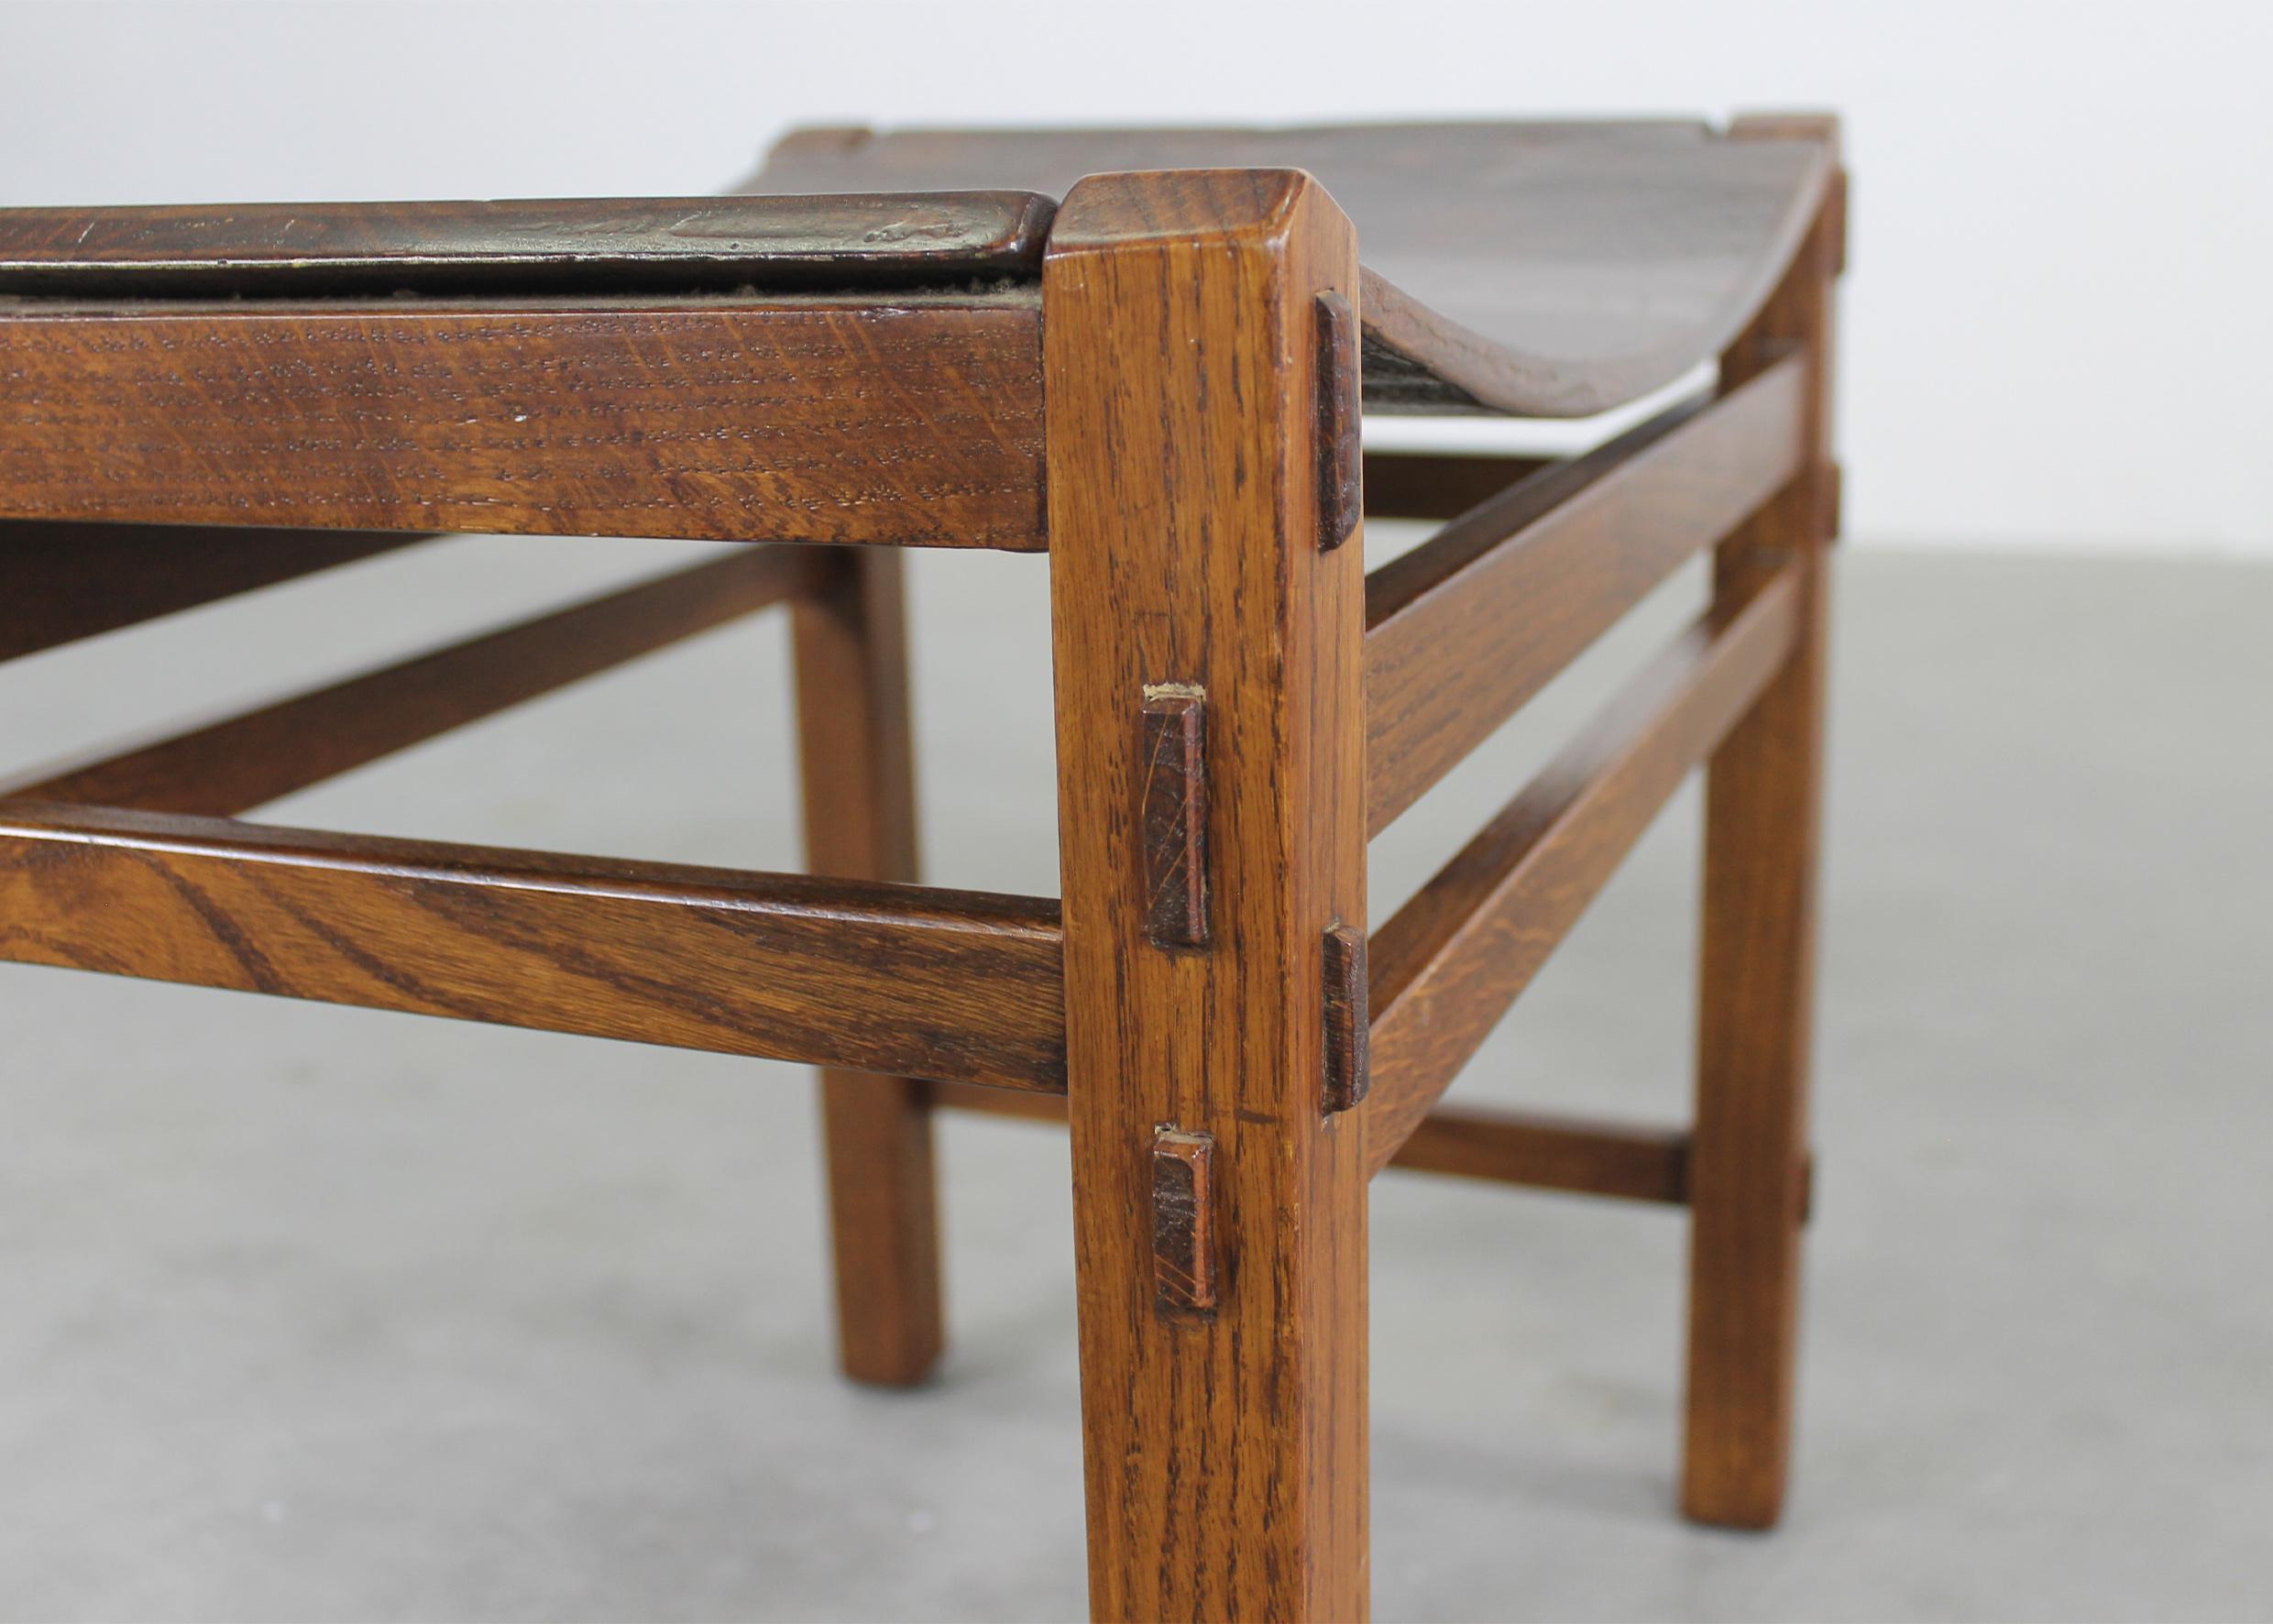 Giuseppe Rivadossi Set of Two Stools in Oak Wood by Officina Rivadossi 1970s For Sale 11